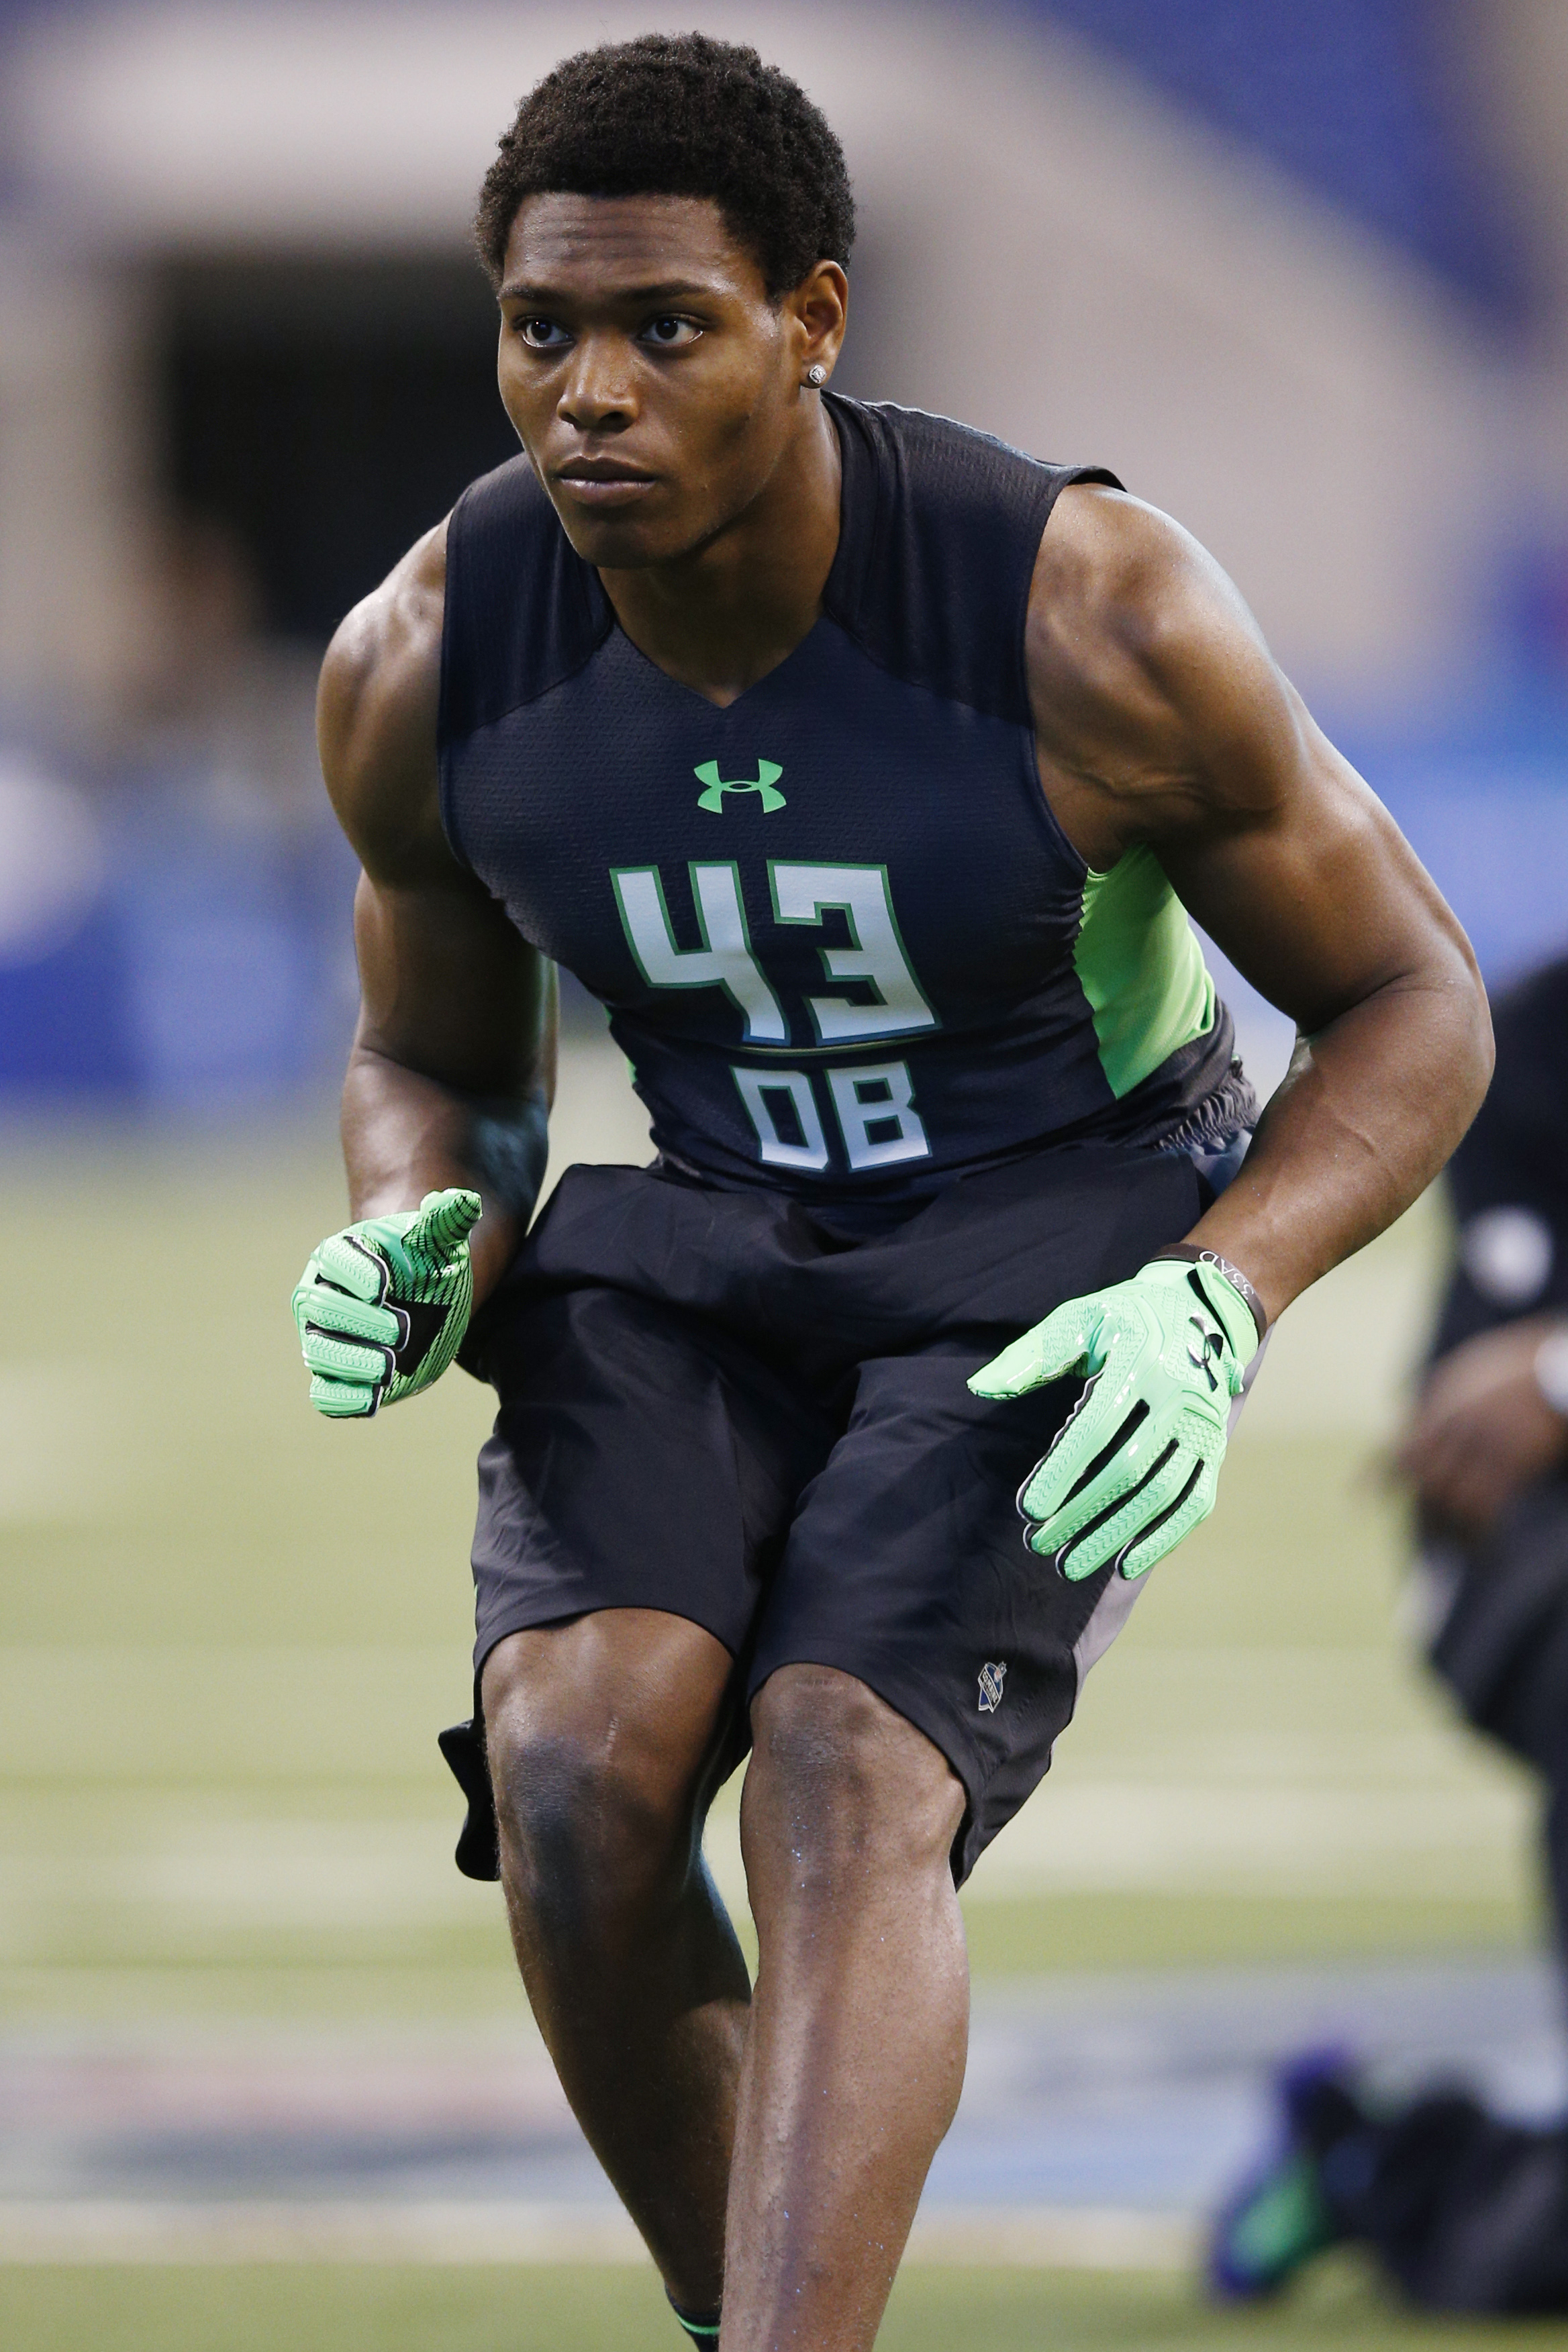 INDIANAPOLIS, IN - FEBRUARY 29: Defensive back Jalen Ramsey of Florida State participates in a drill during the 2016 NFL Scouting Combine at Lucas Oil Stadium on February 29, 2016 in Indianapolis, Indiana. (Photo by Joe Robbins/Getty Images)